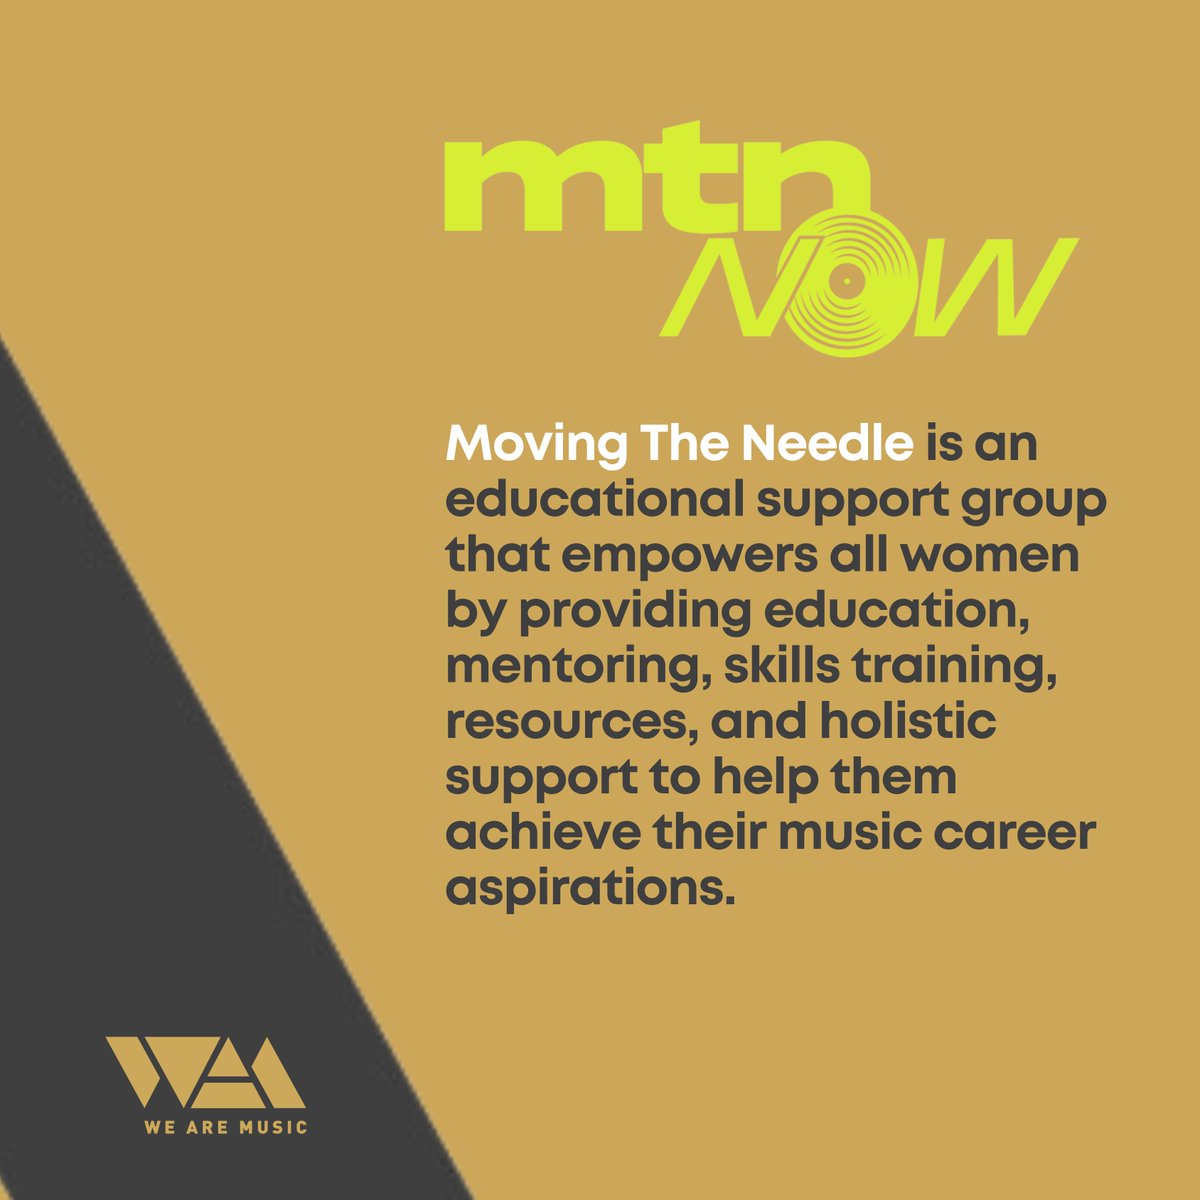 Moving The Needle @mtnNOW_  is an educational support group that empowers all women by providing education, mentoring, skills training, resources, and holistic support to help them achieve their music career aspirations.

Find out more:
mtnnow.com